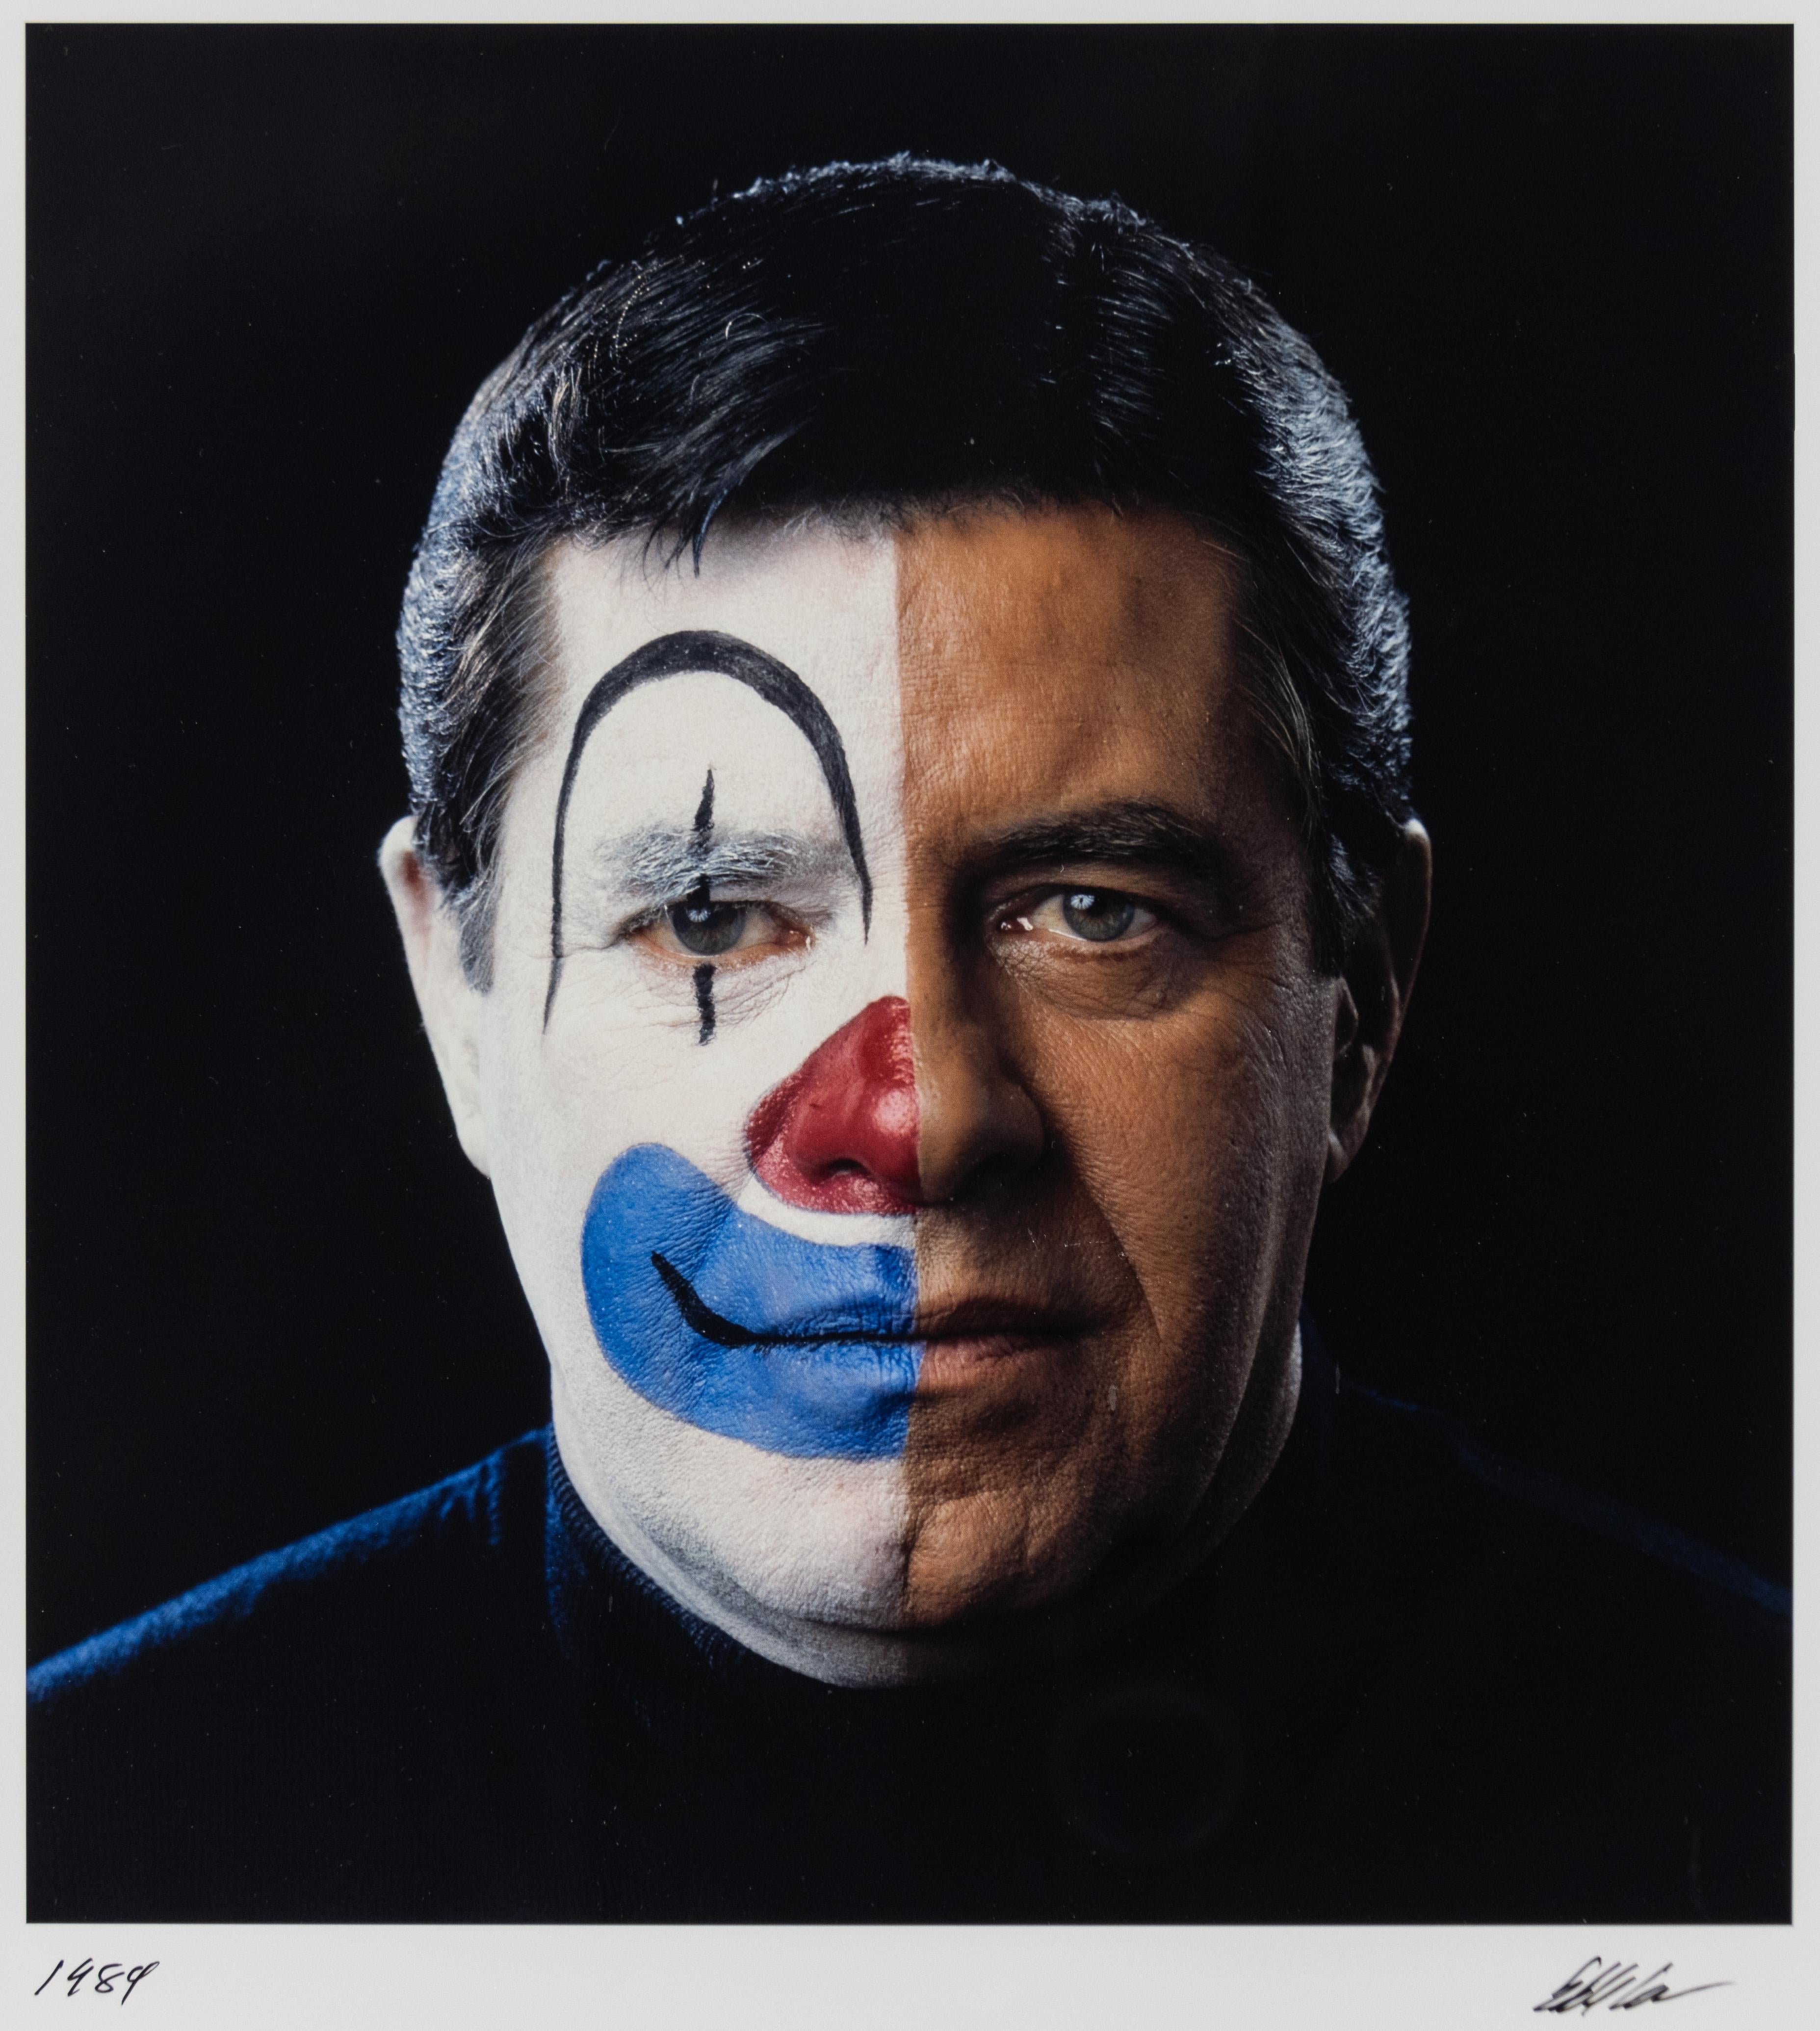 Jerry Lewis Clown Face Cover of “Parade Magazine” - Photograph by Eddie Adams